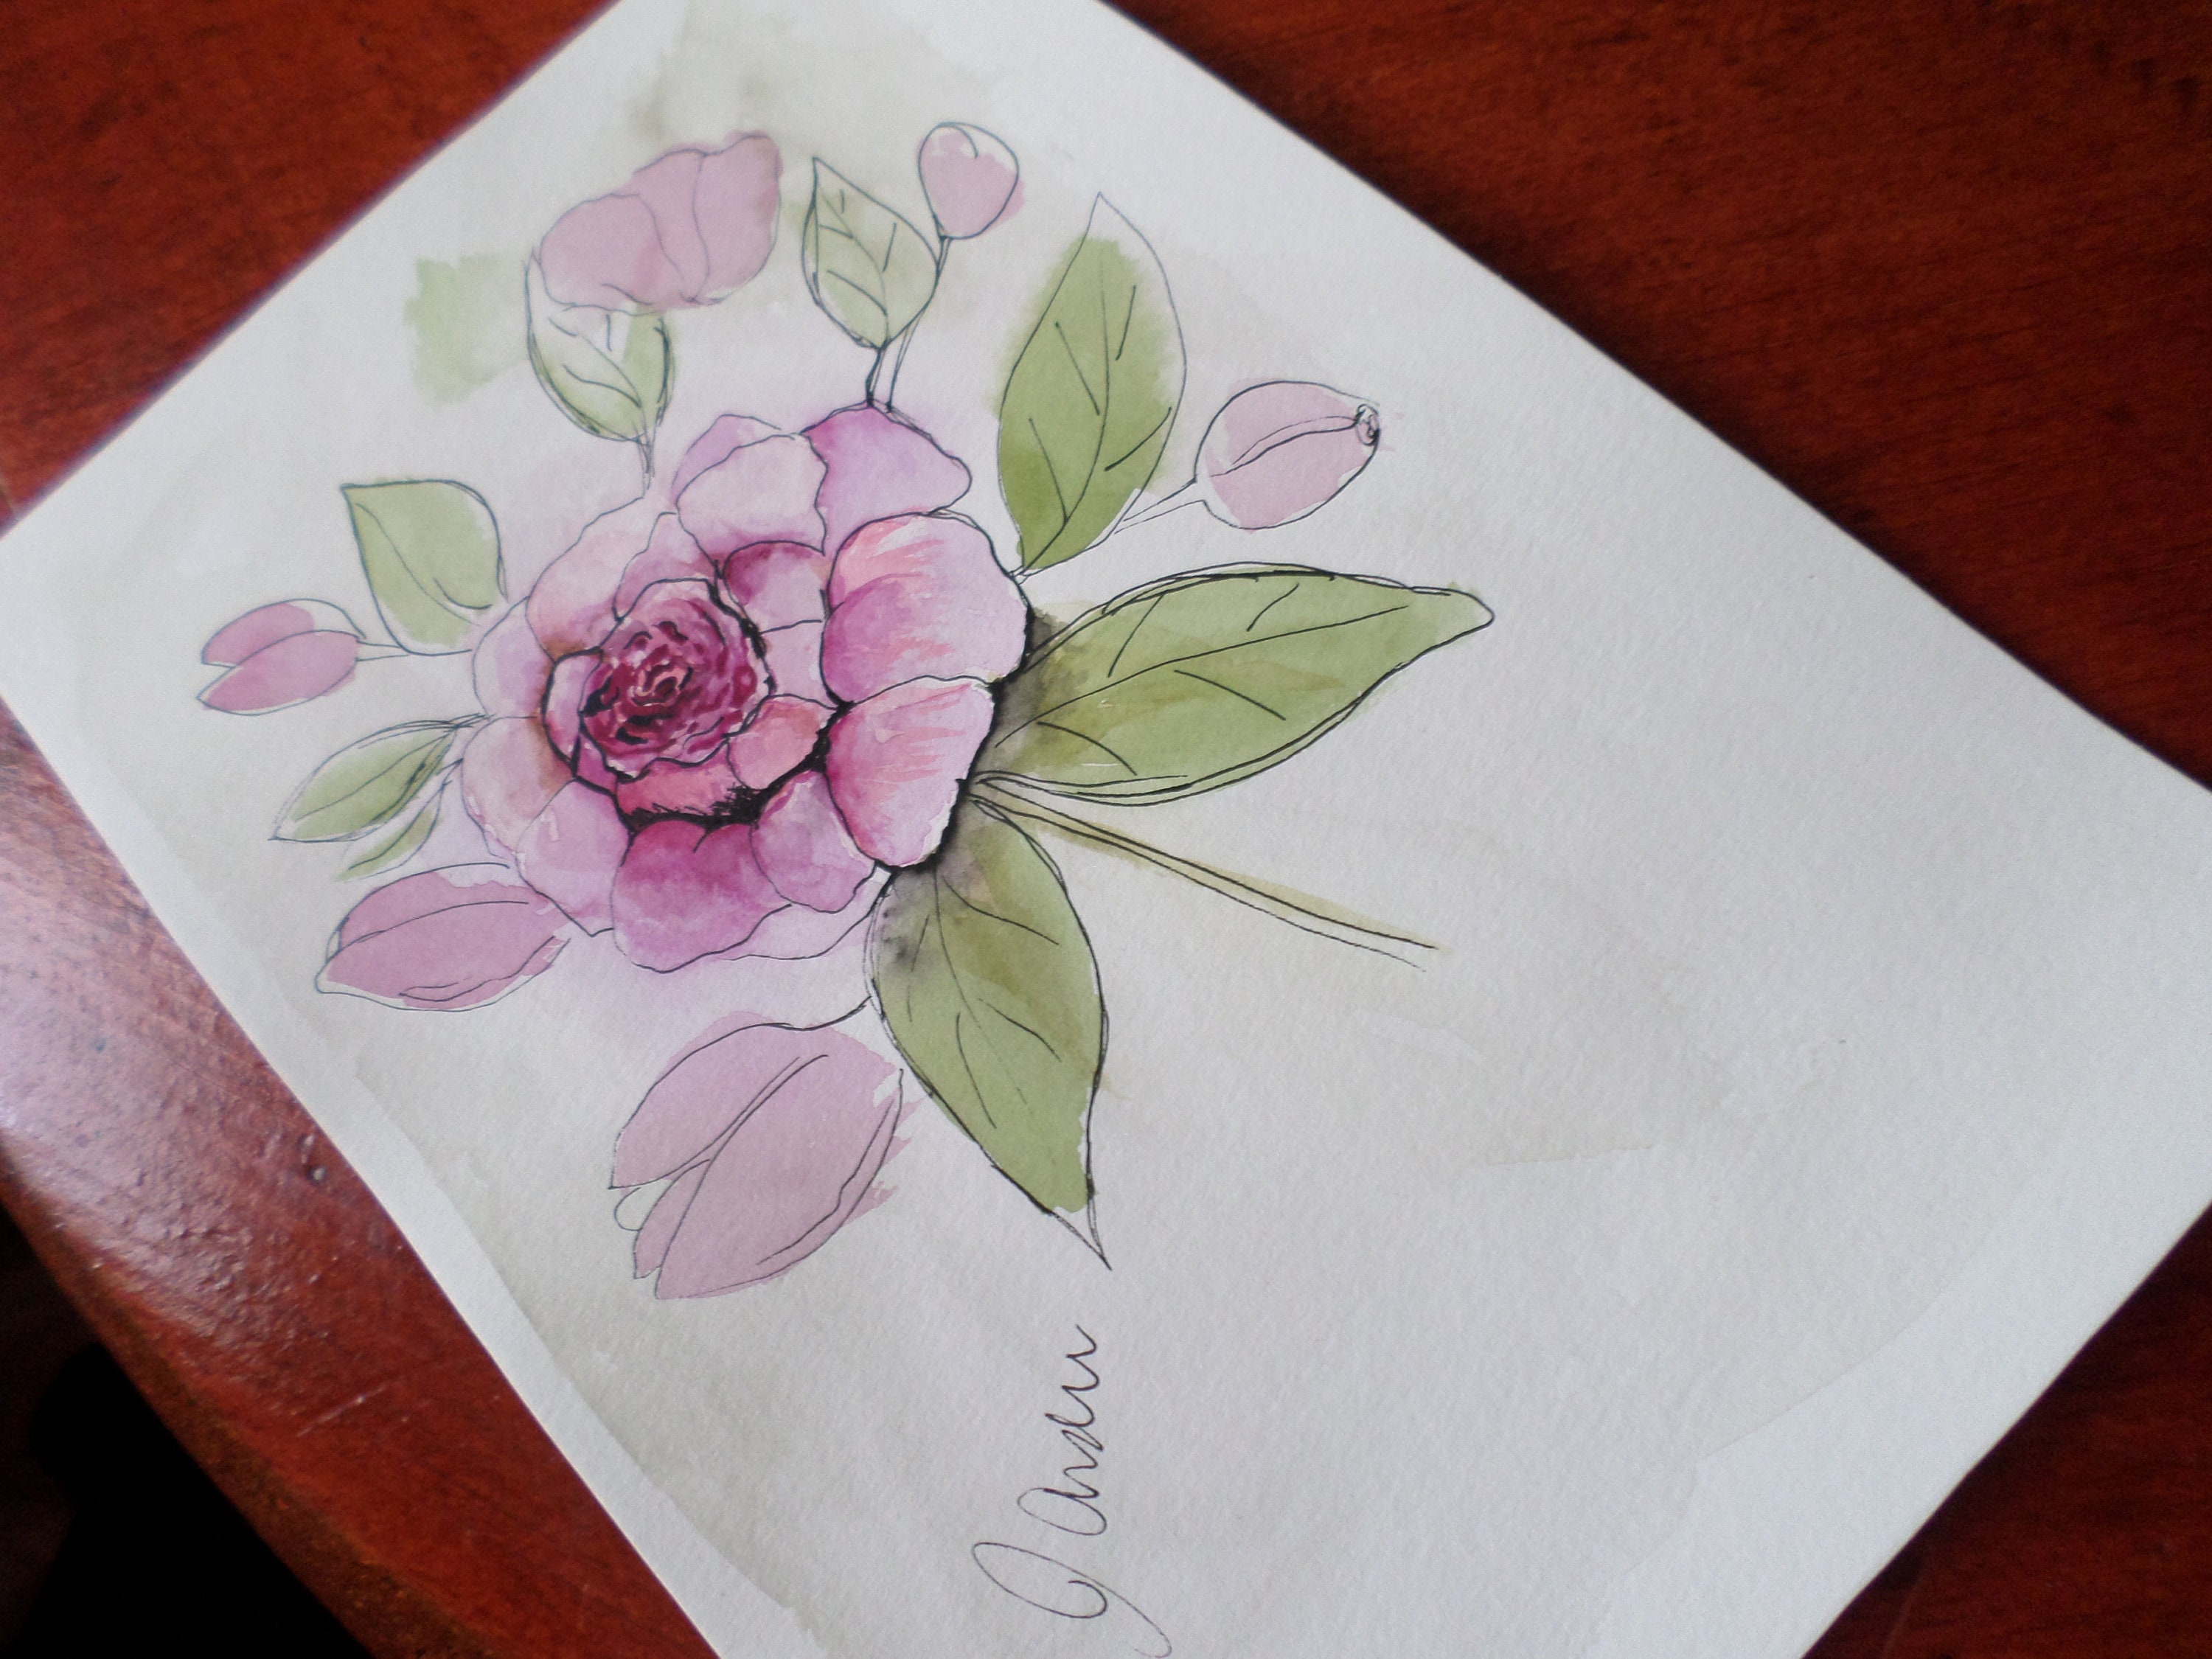 Original by Jamie Anderson Roses 9x6 Line and Wash Botanical Art